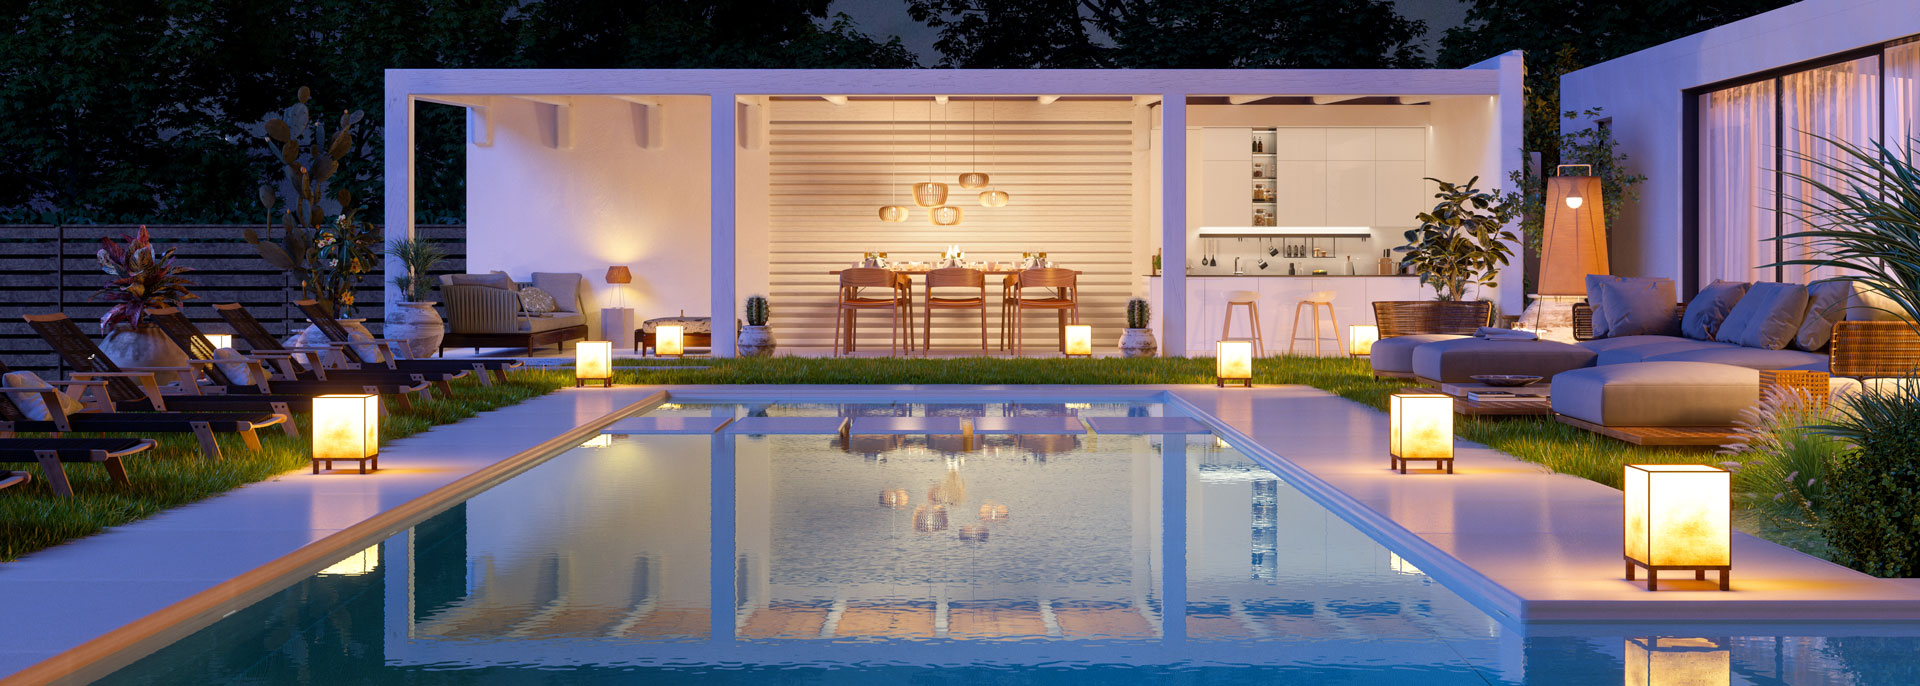 ultimate swimming pools and spas luxurious inground pools